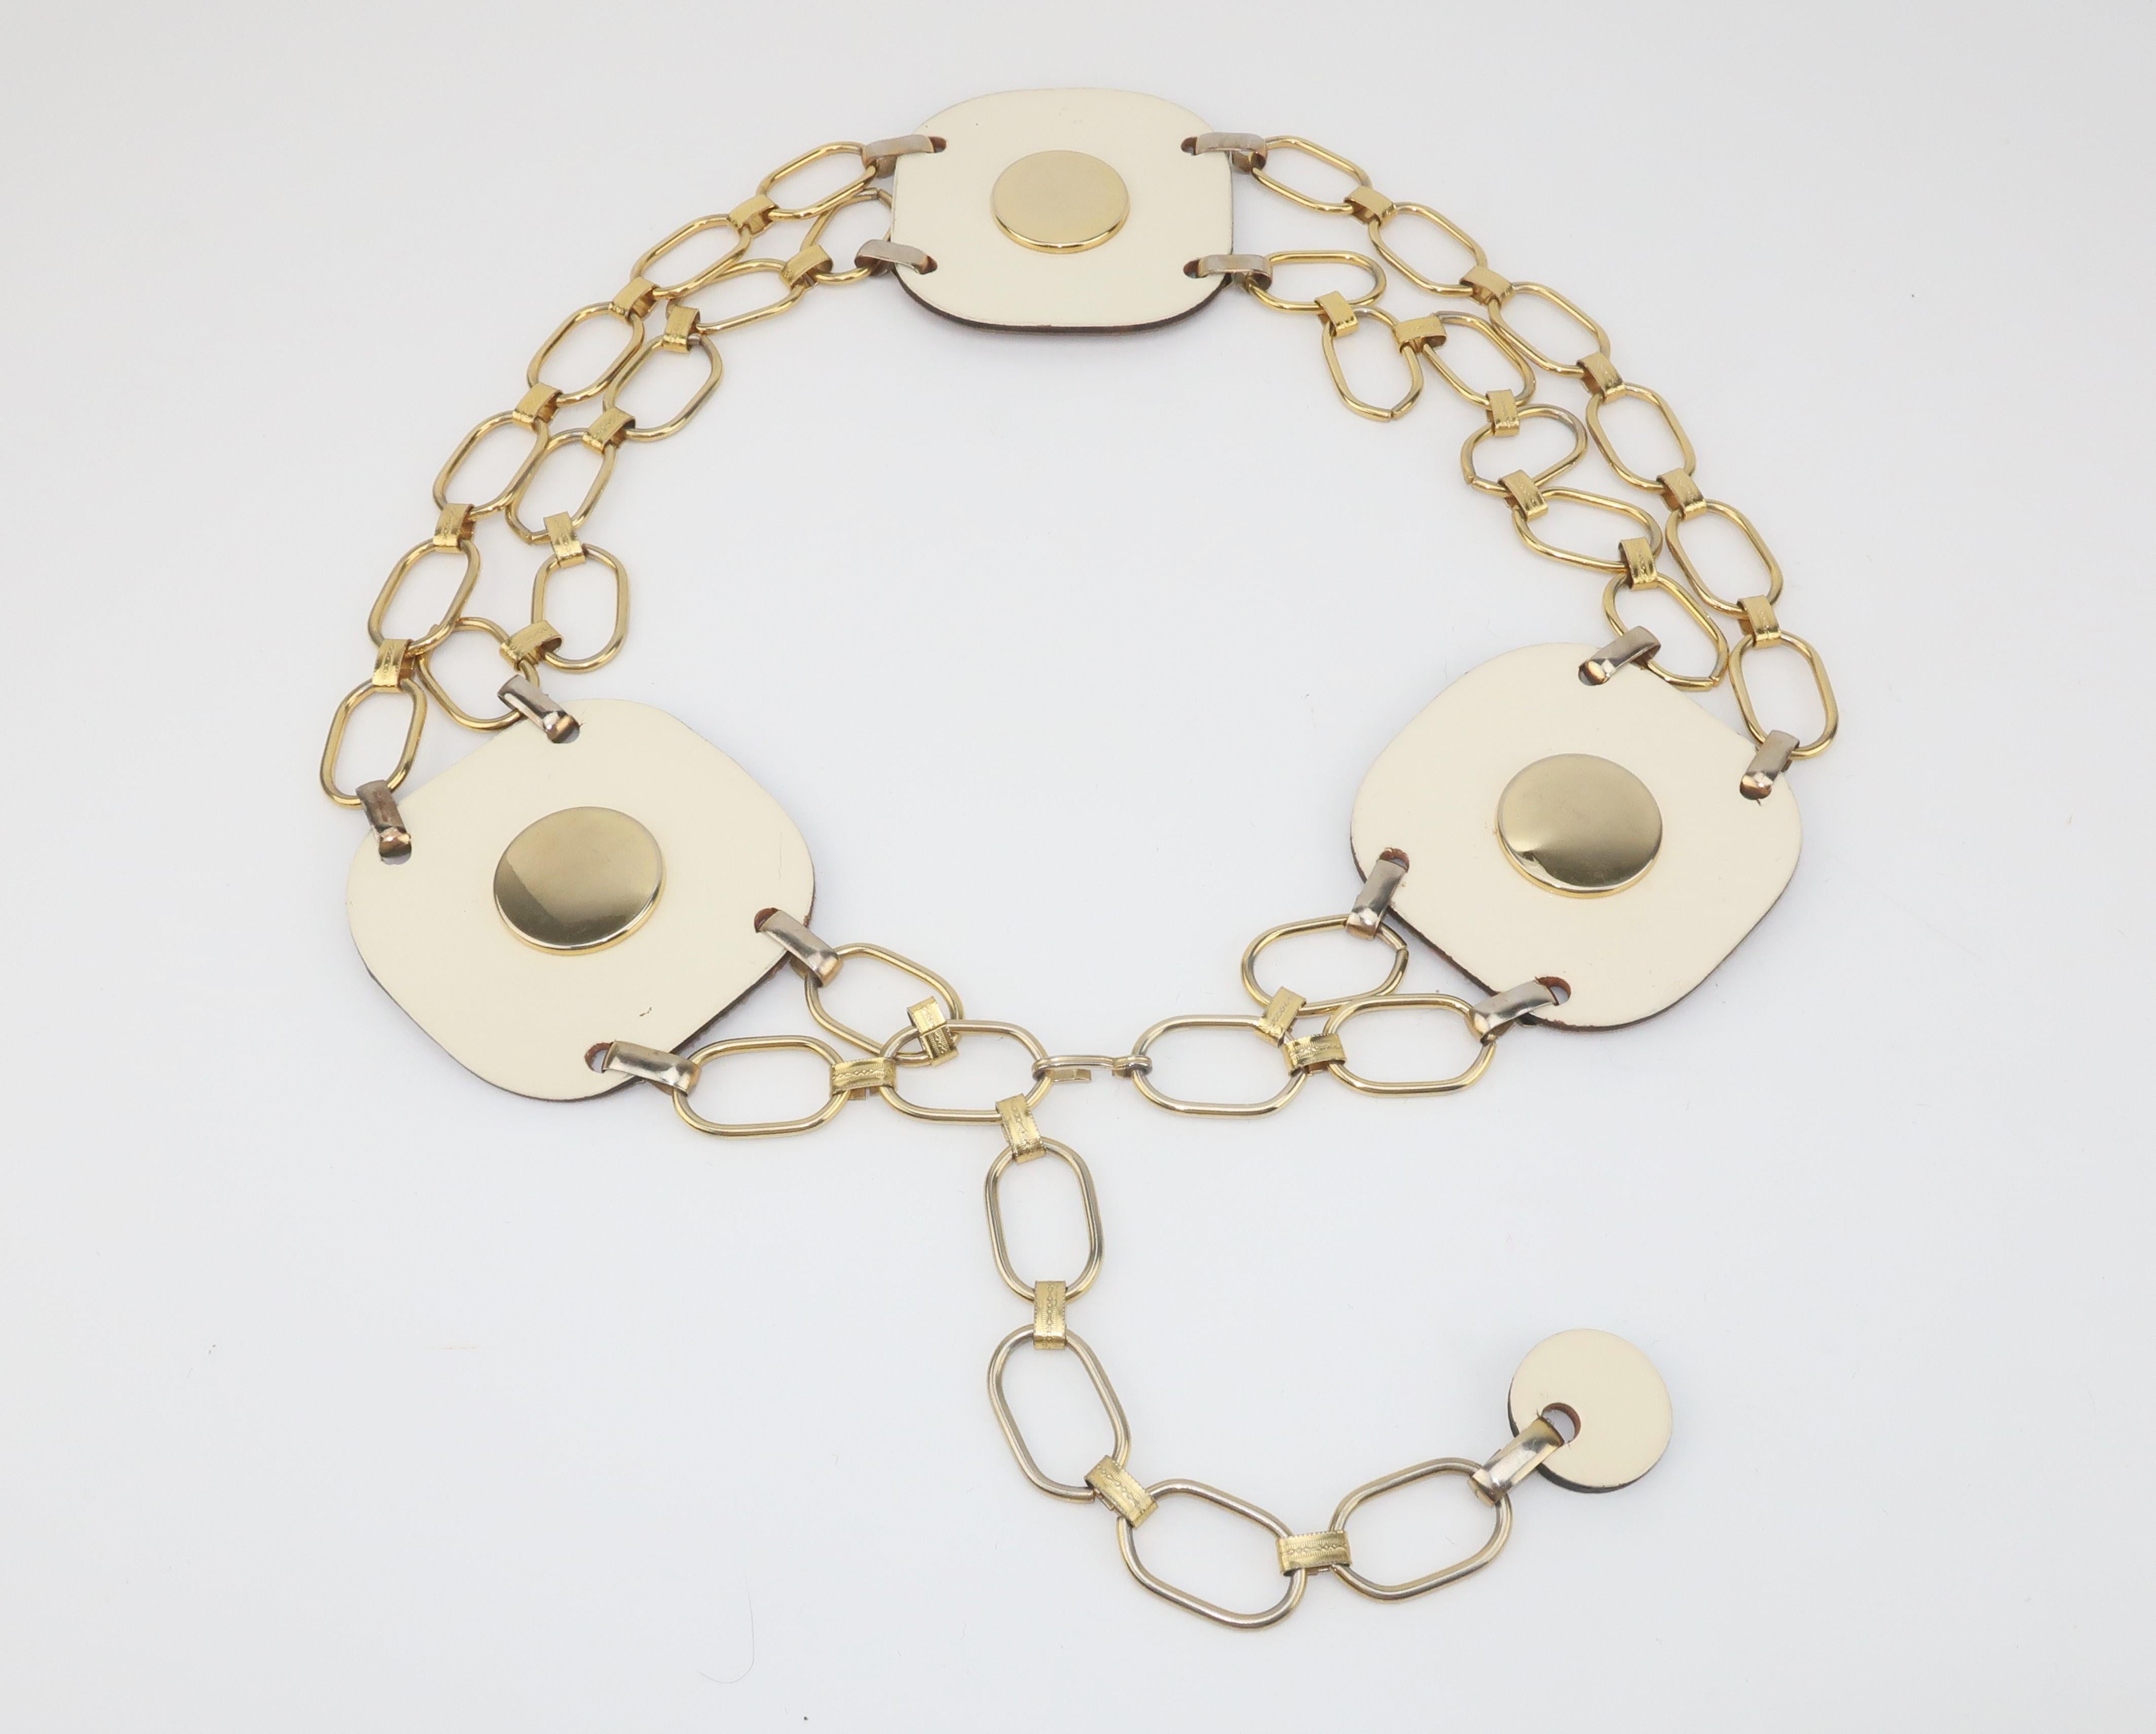 If you are in a mod mood then this 1960's white leather gold tone chain belt will be the perfect accessory.  Adjustable hook closure allows for wear as a hip hugger style or in a relaxed waist position.  Fun for a little pop of the